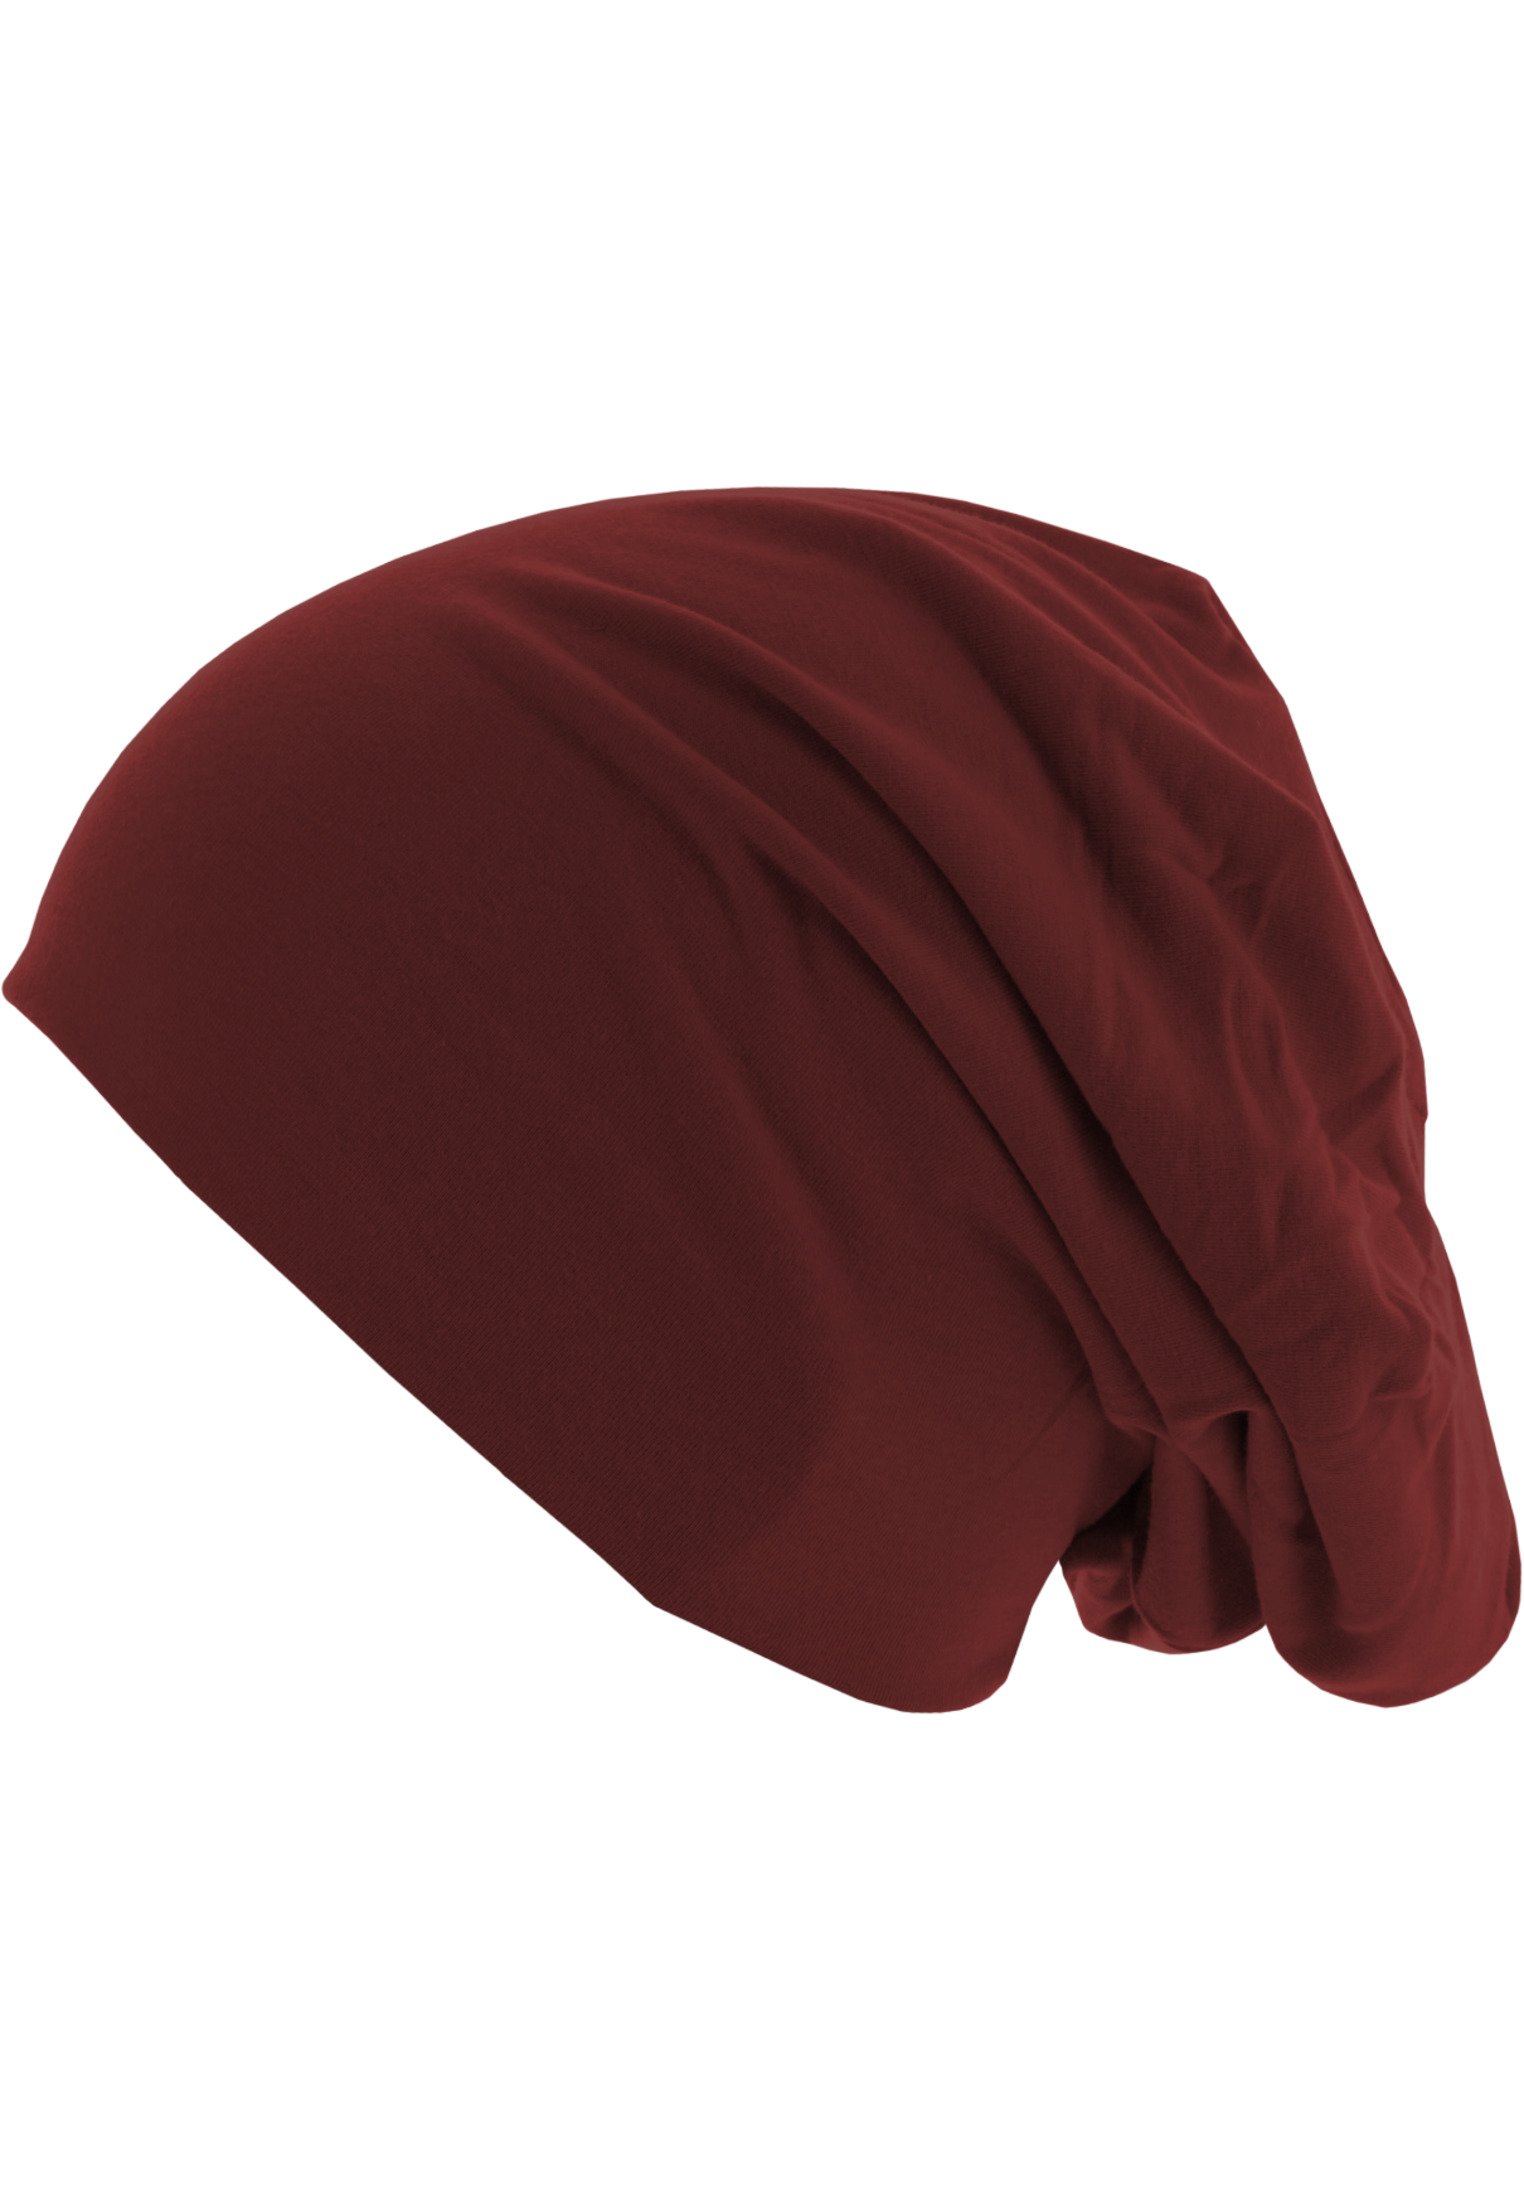 Jersey Beanie MSTRDS maroon one size